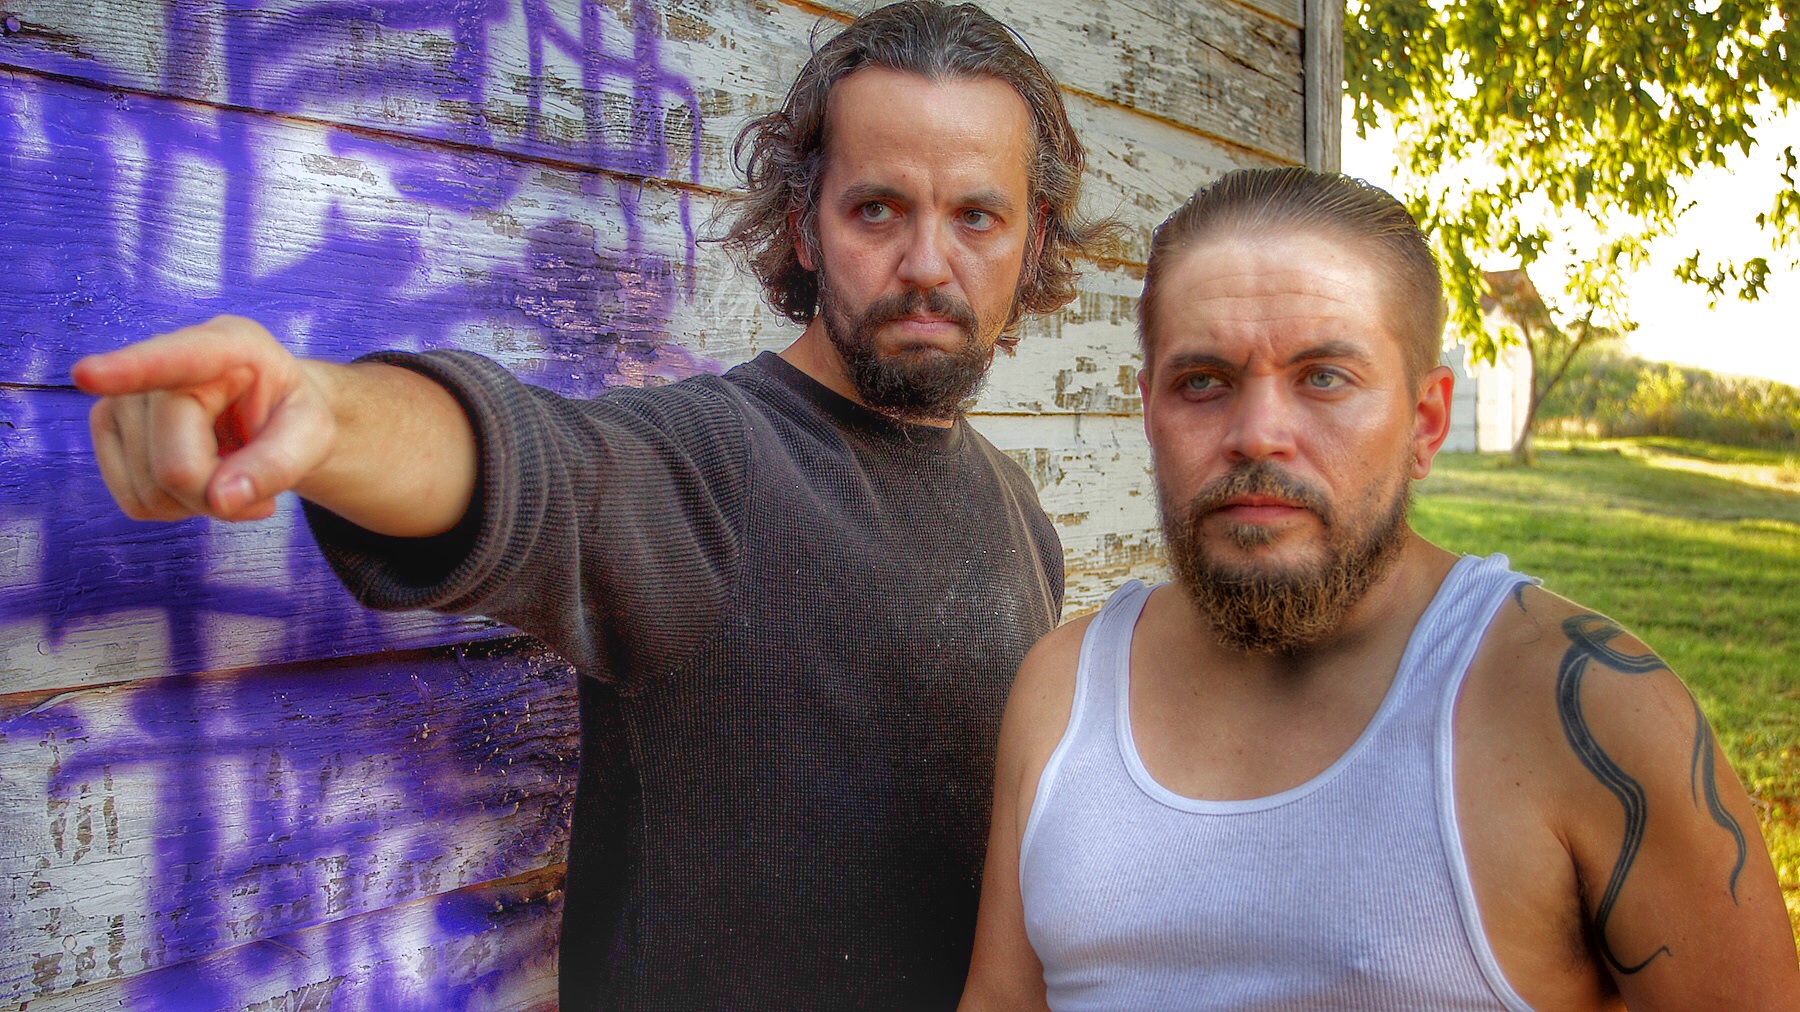 Todd Jenkins on the left as SHAWN in inHUMANE.